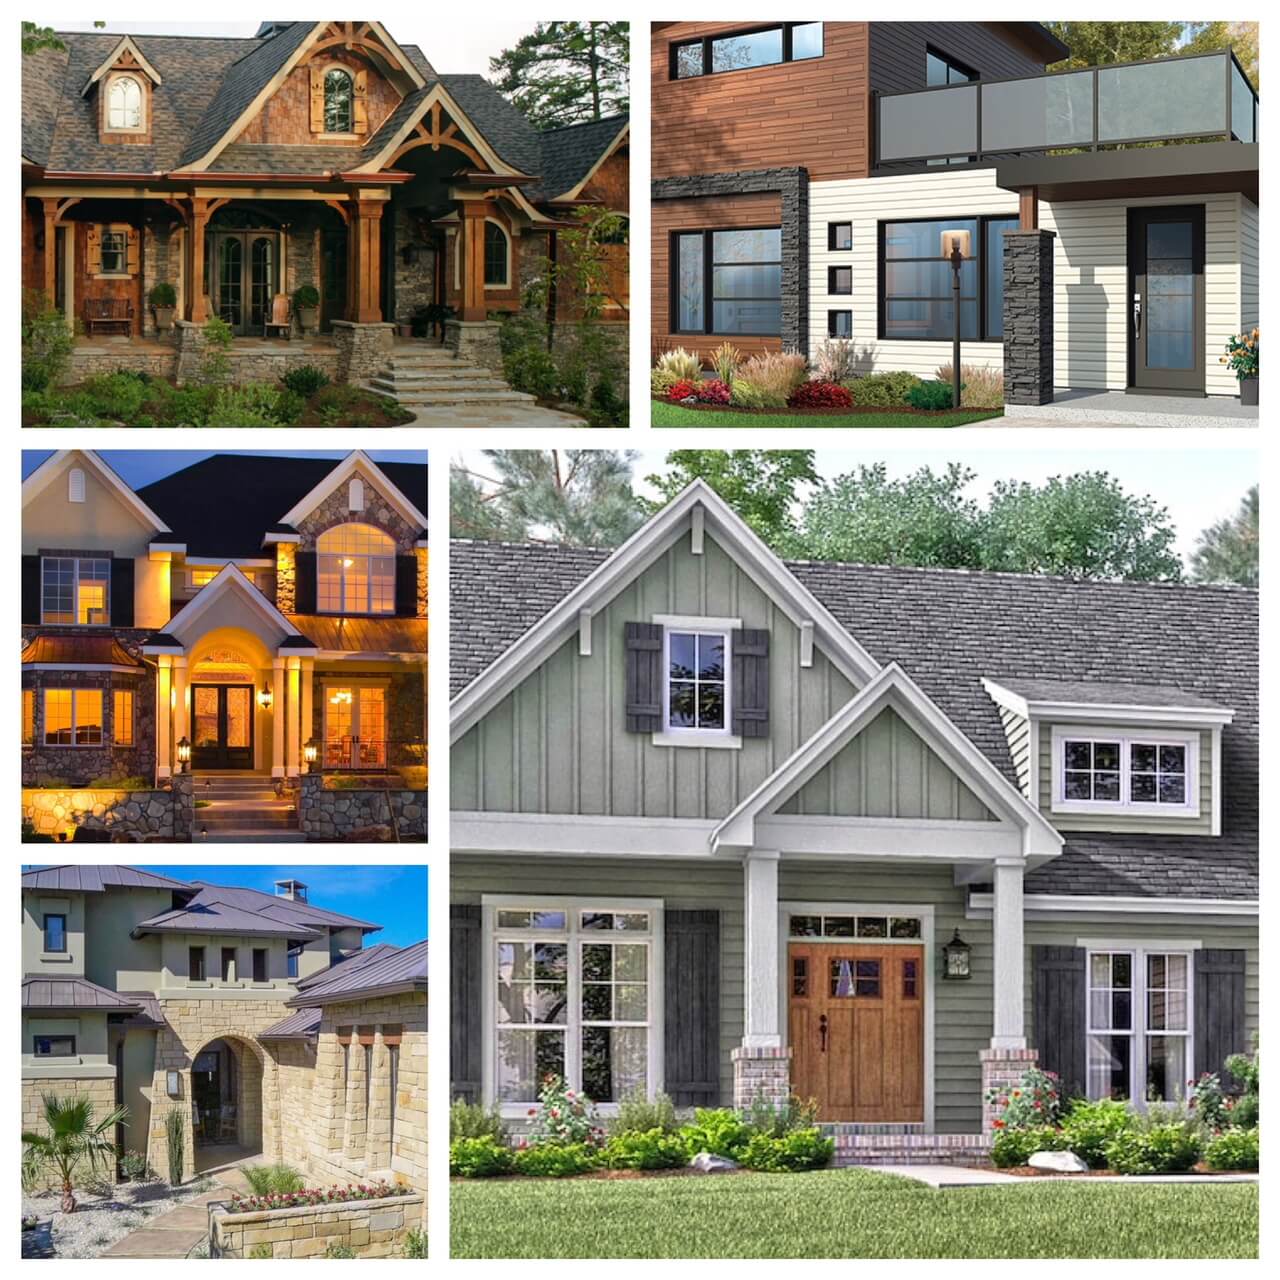 Collage of houses with different architectural styles from Modern to Craftsman to Country and Southwest.